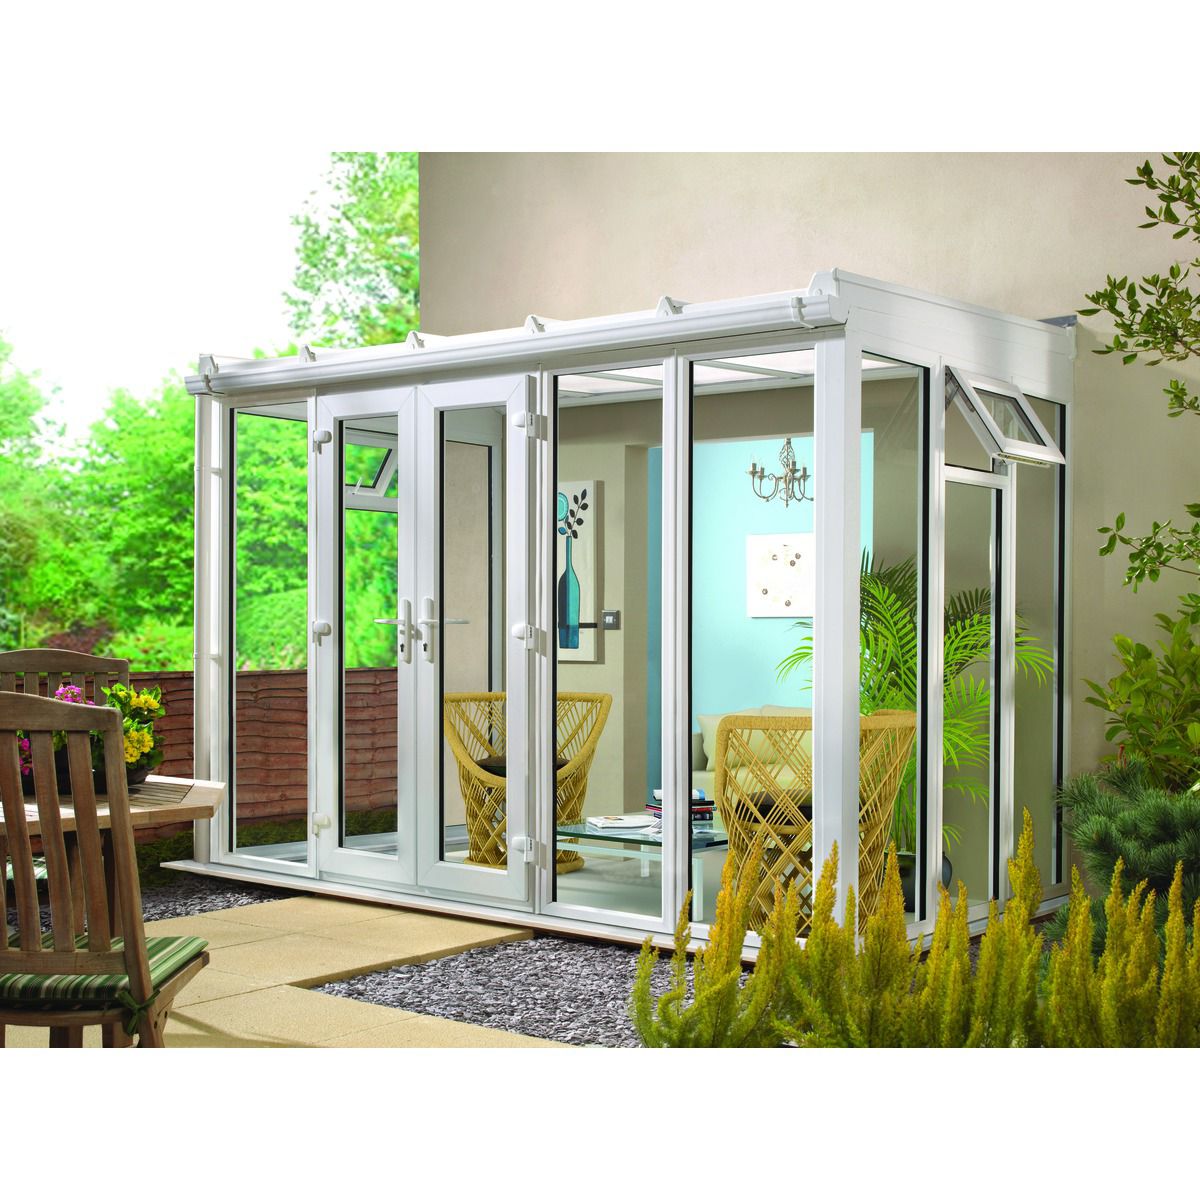 Image of Euramax Lean To Full Glass White Roof Conservatory - 10 x 6ft